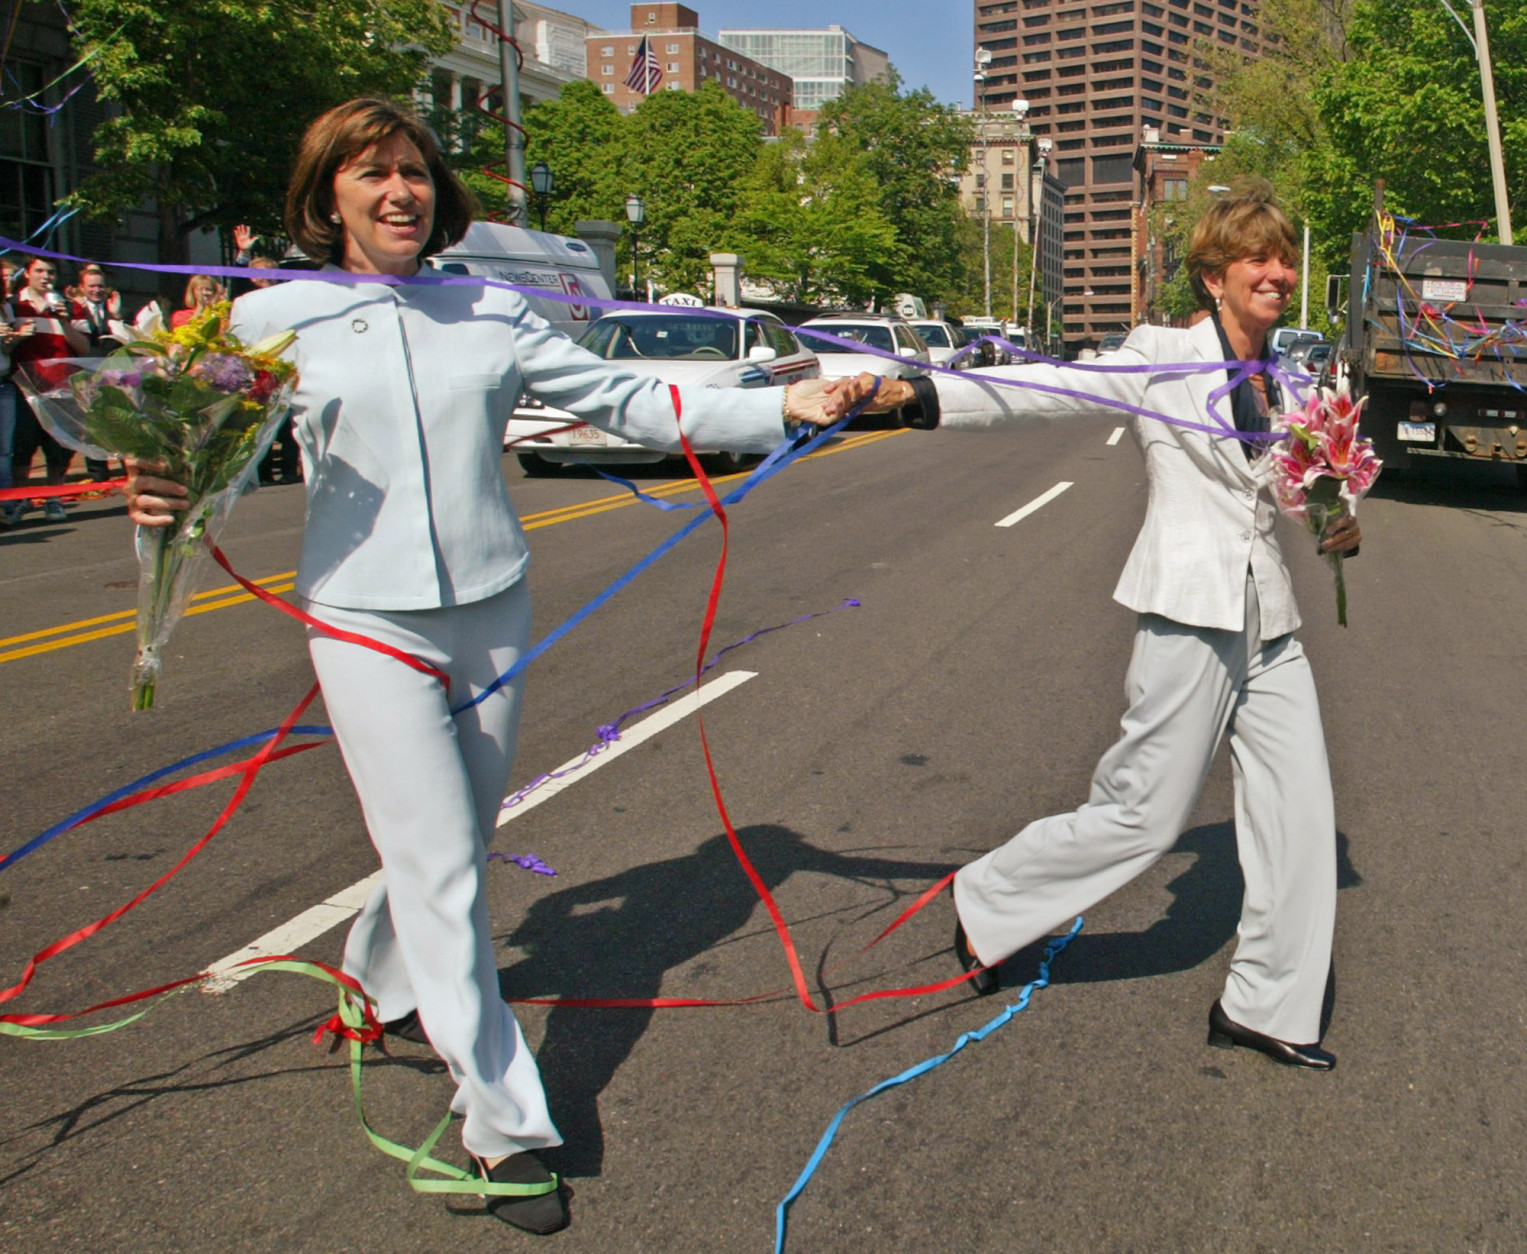 ** FILE ** Julie Goodridge, left, and her spouse Hillary Goodridge cross the street in front of the State House in Boston while leaving the Unitarian Universalist church after being married in this Monday, May 17, 2004 file photo.  According to a local political consultant, the couple whose lawsuit ultimately led to legal same-sex marriage in Massachusetts have announced they have separated. (AP Photo/Winslow Townson)